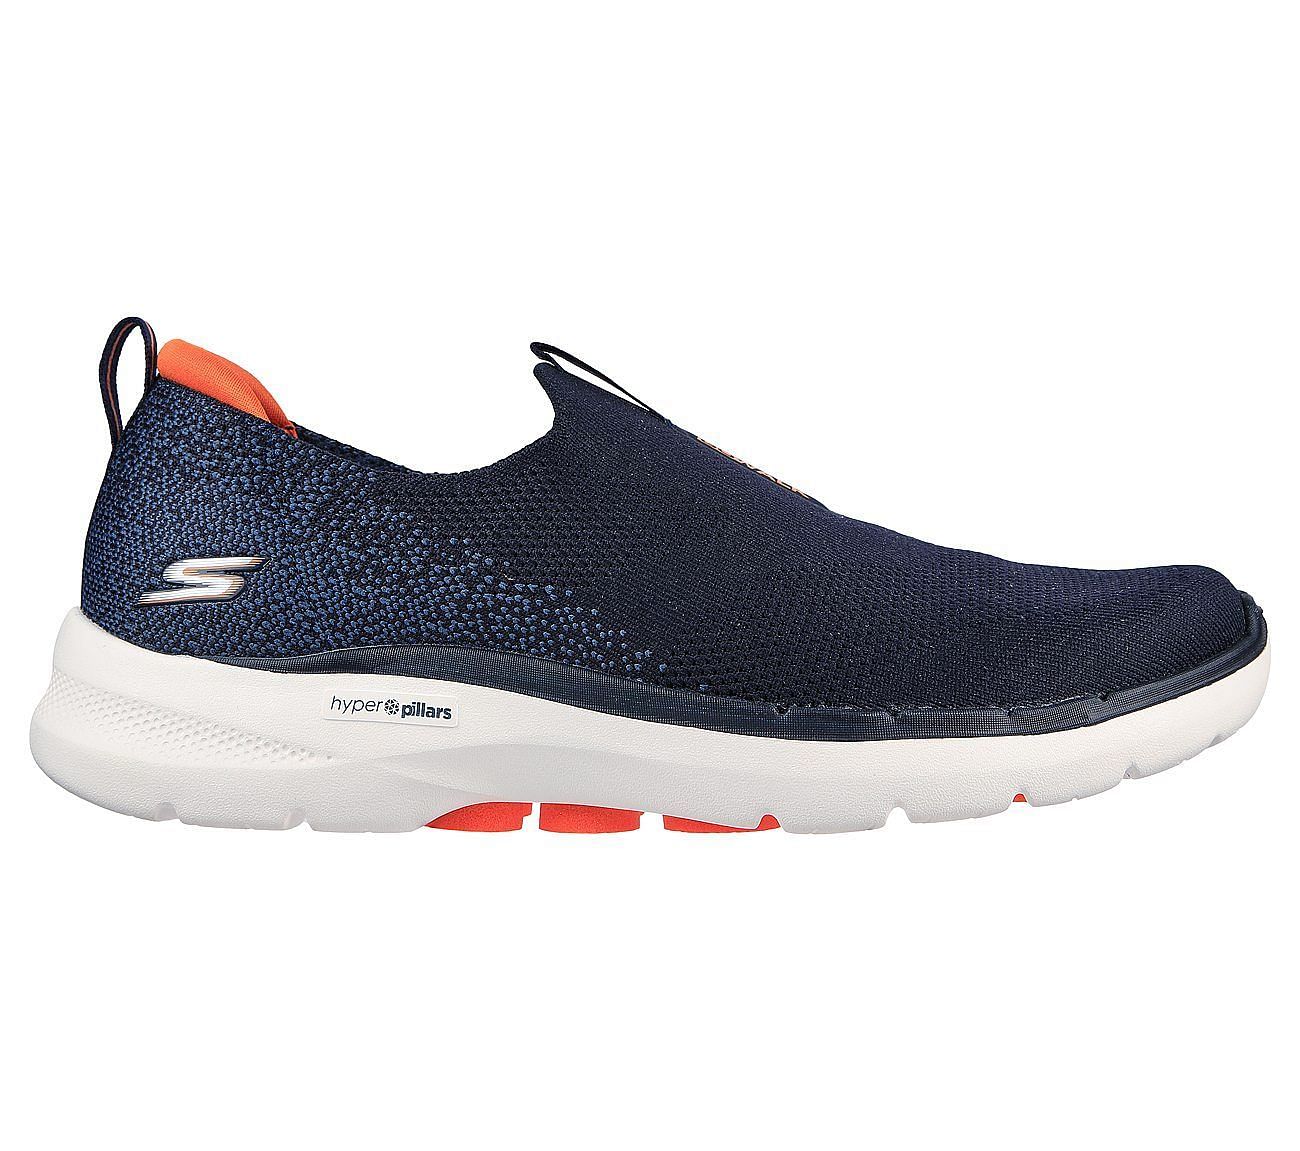 This pair is lightweight and very comfortable for long walks (Photo via skechers.in)